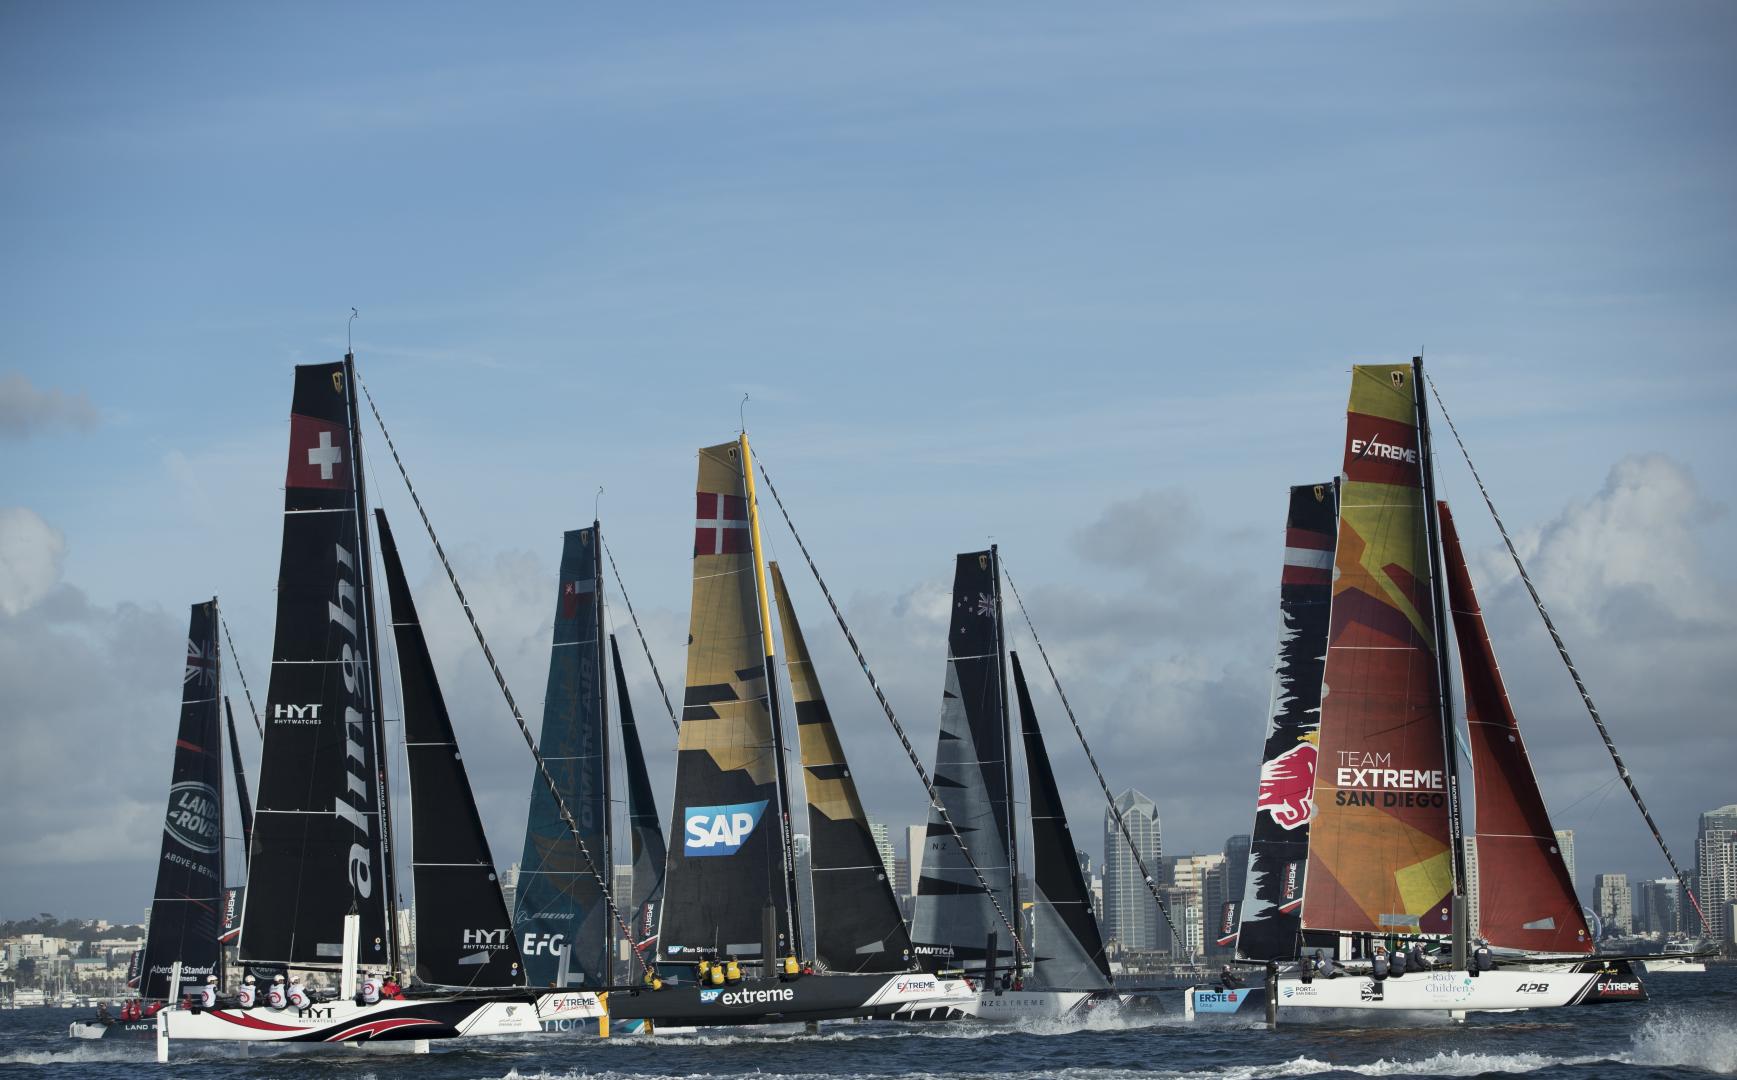 Teams announced for 2018 Extreme Sailing Series™ in what promises to be the toughest year yet